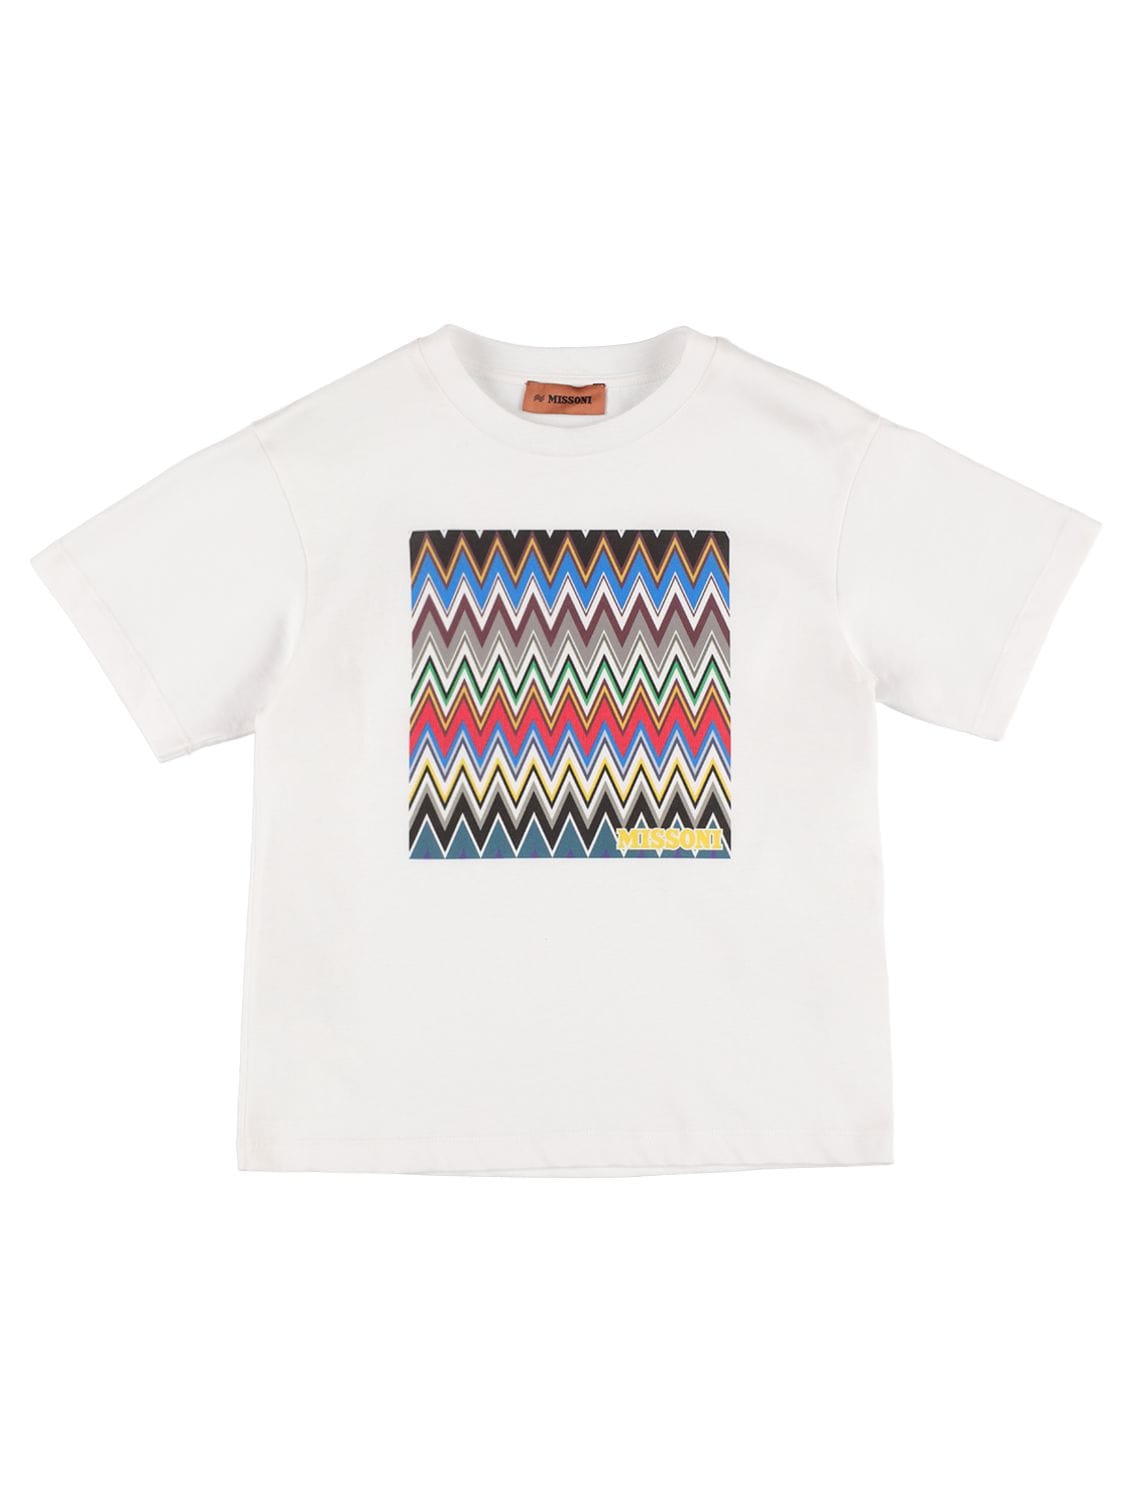 Image of Printed Cotton Jersey T-shirt